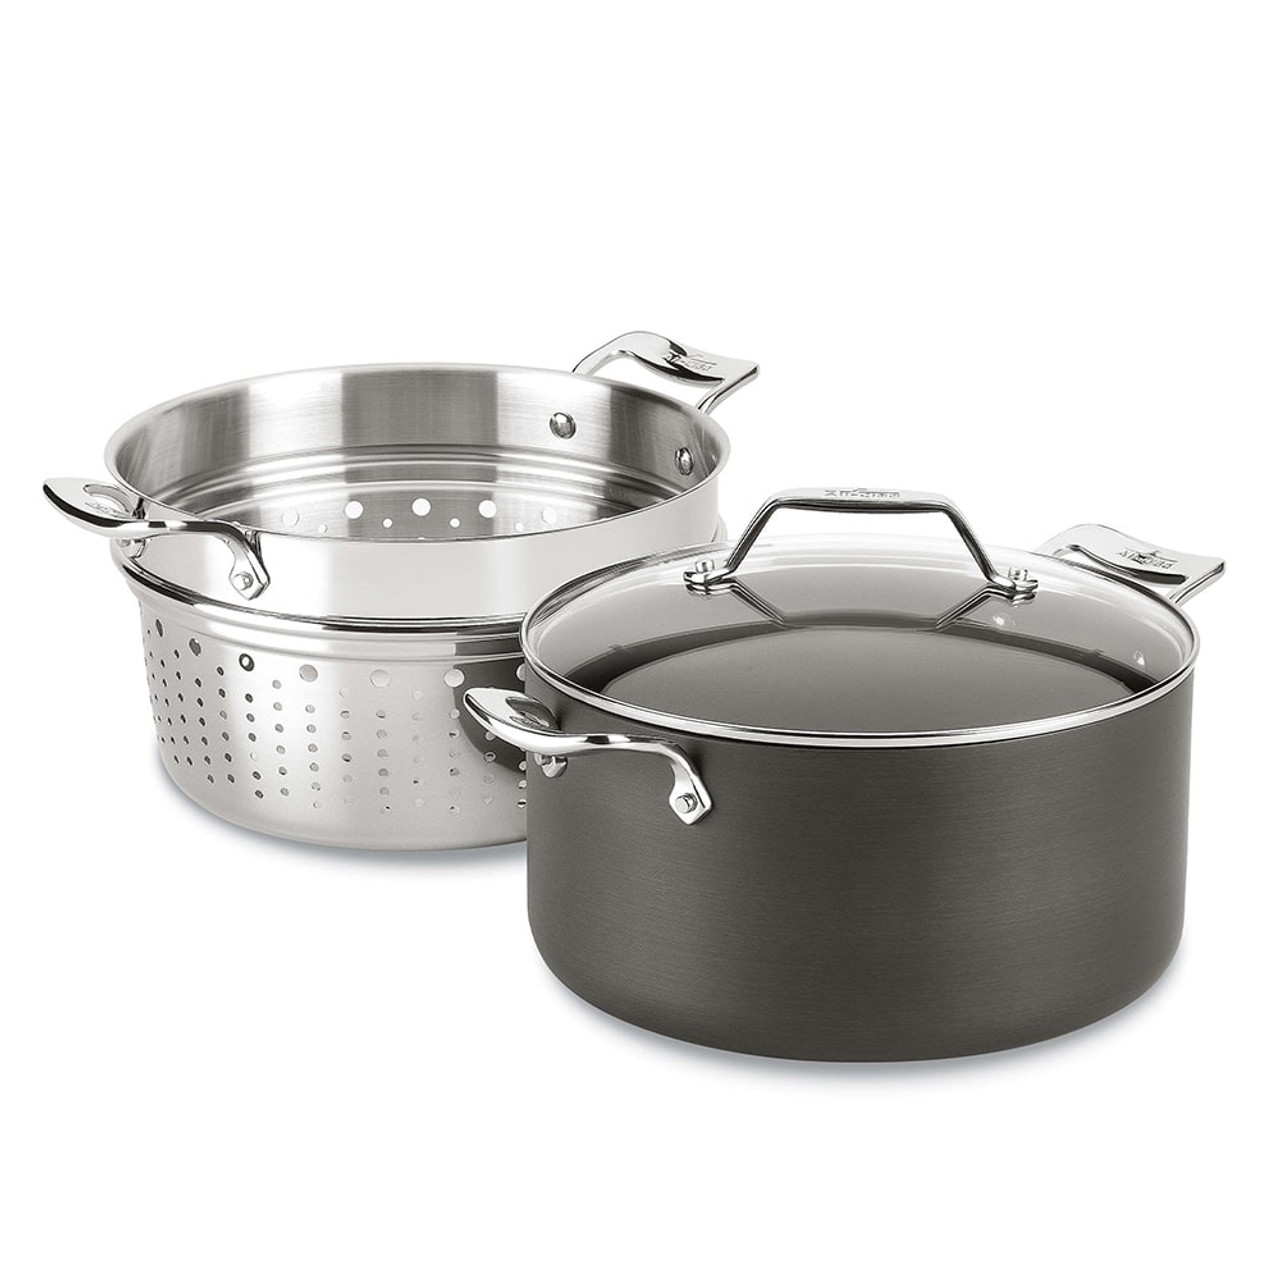 https://cdn11.bigcommerce.com/s-hccytny0od/images/stencil/1280x1280/products/3574/12754/all-clad-essentials-nonstick-multipot__64908.1601384451.jpg?c=2?imbypass=on